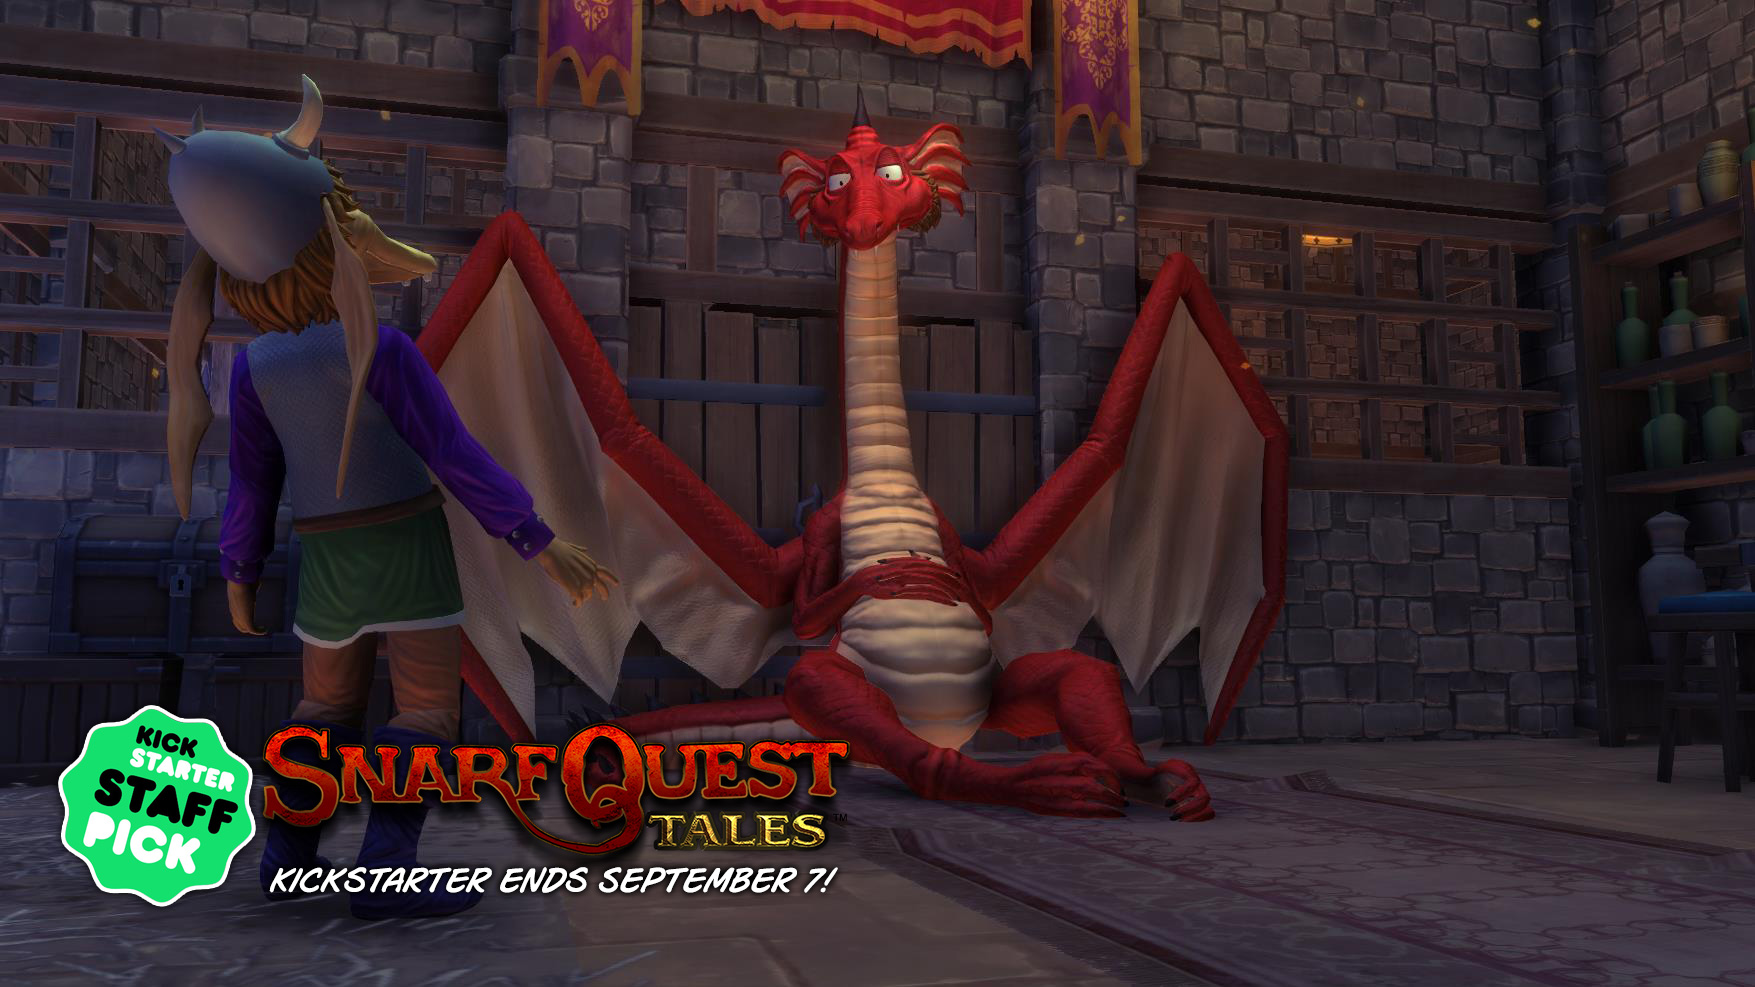 Snarf meets Willie the Dragon in SnarfQuest Tales